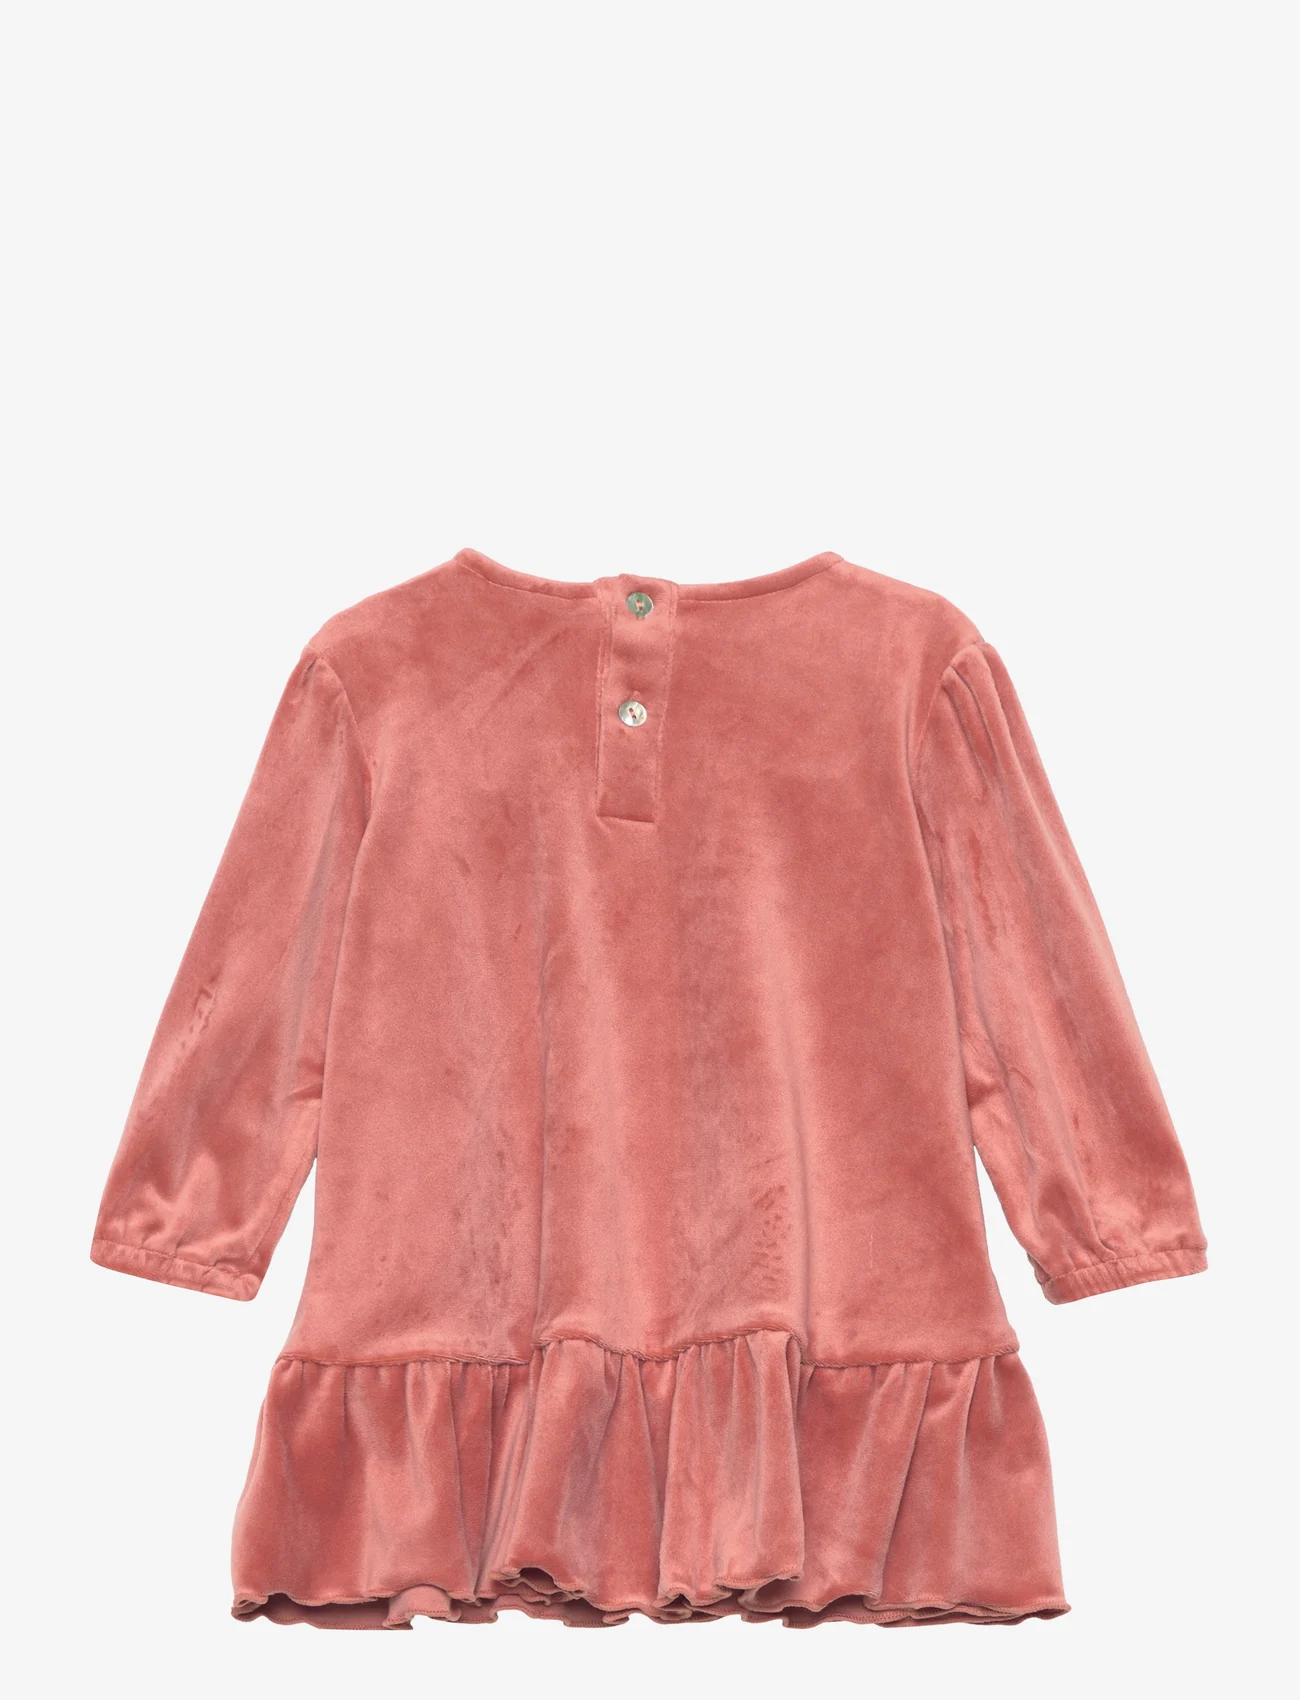 Sofie Schnoor Baby and Kids - Dress - long-sleeved casual dresses - rust red - 1